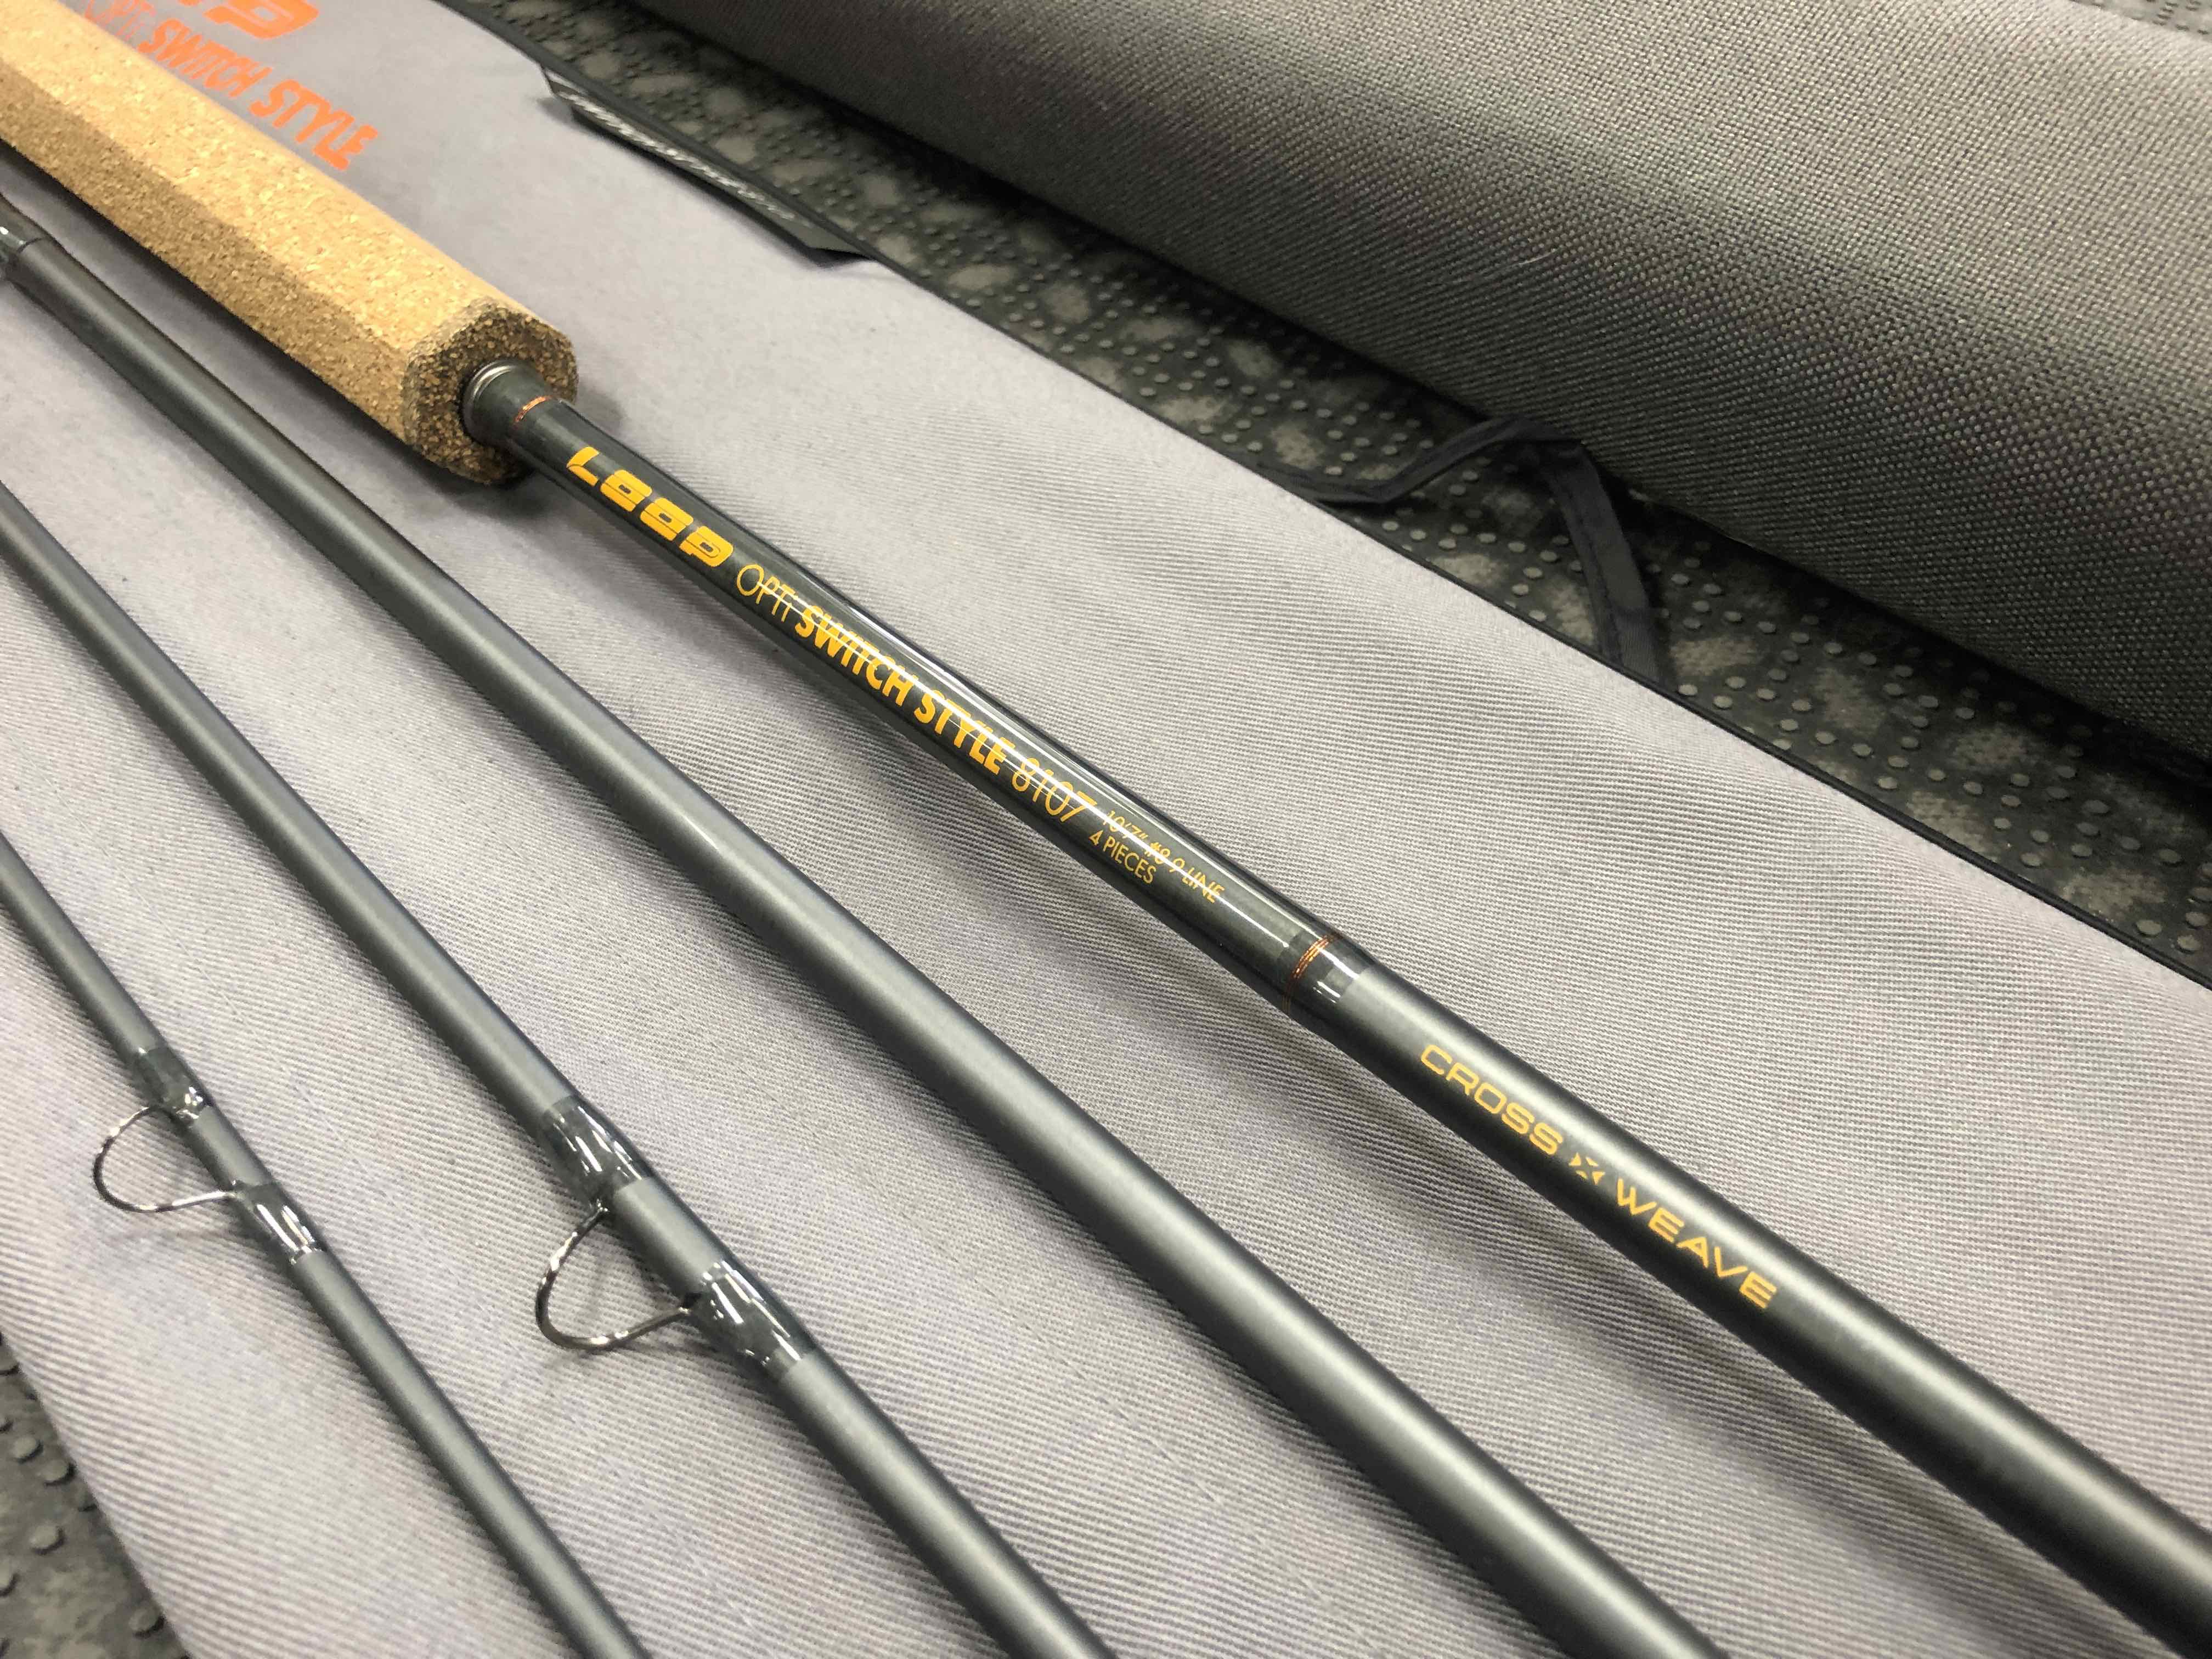 Loop Opti - Switch Style - 8107 - Cross Weave - 10’ 7” - 8/9Wt - 4Pc - Switch Fly Rod - BRAND NEW! - $300